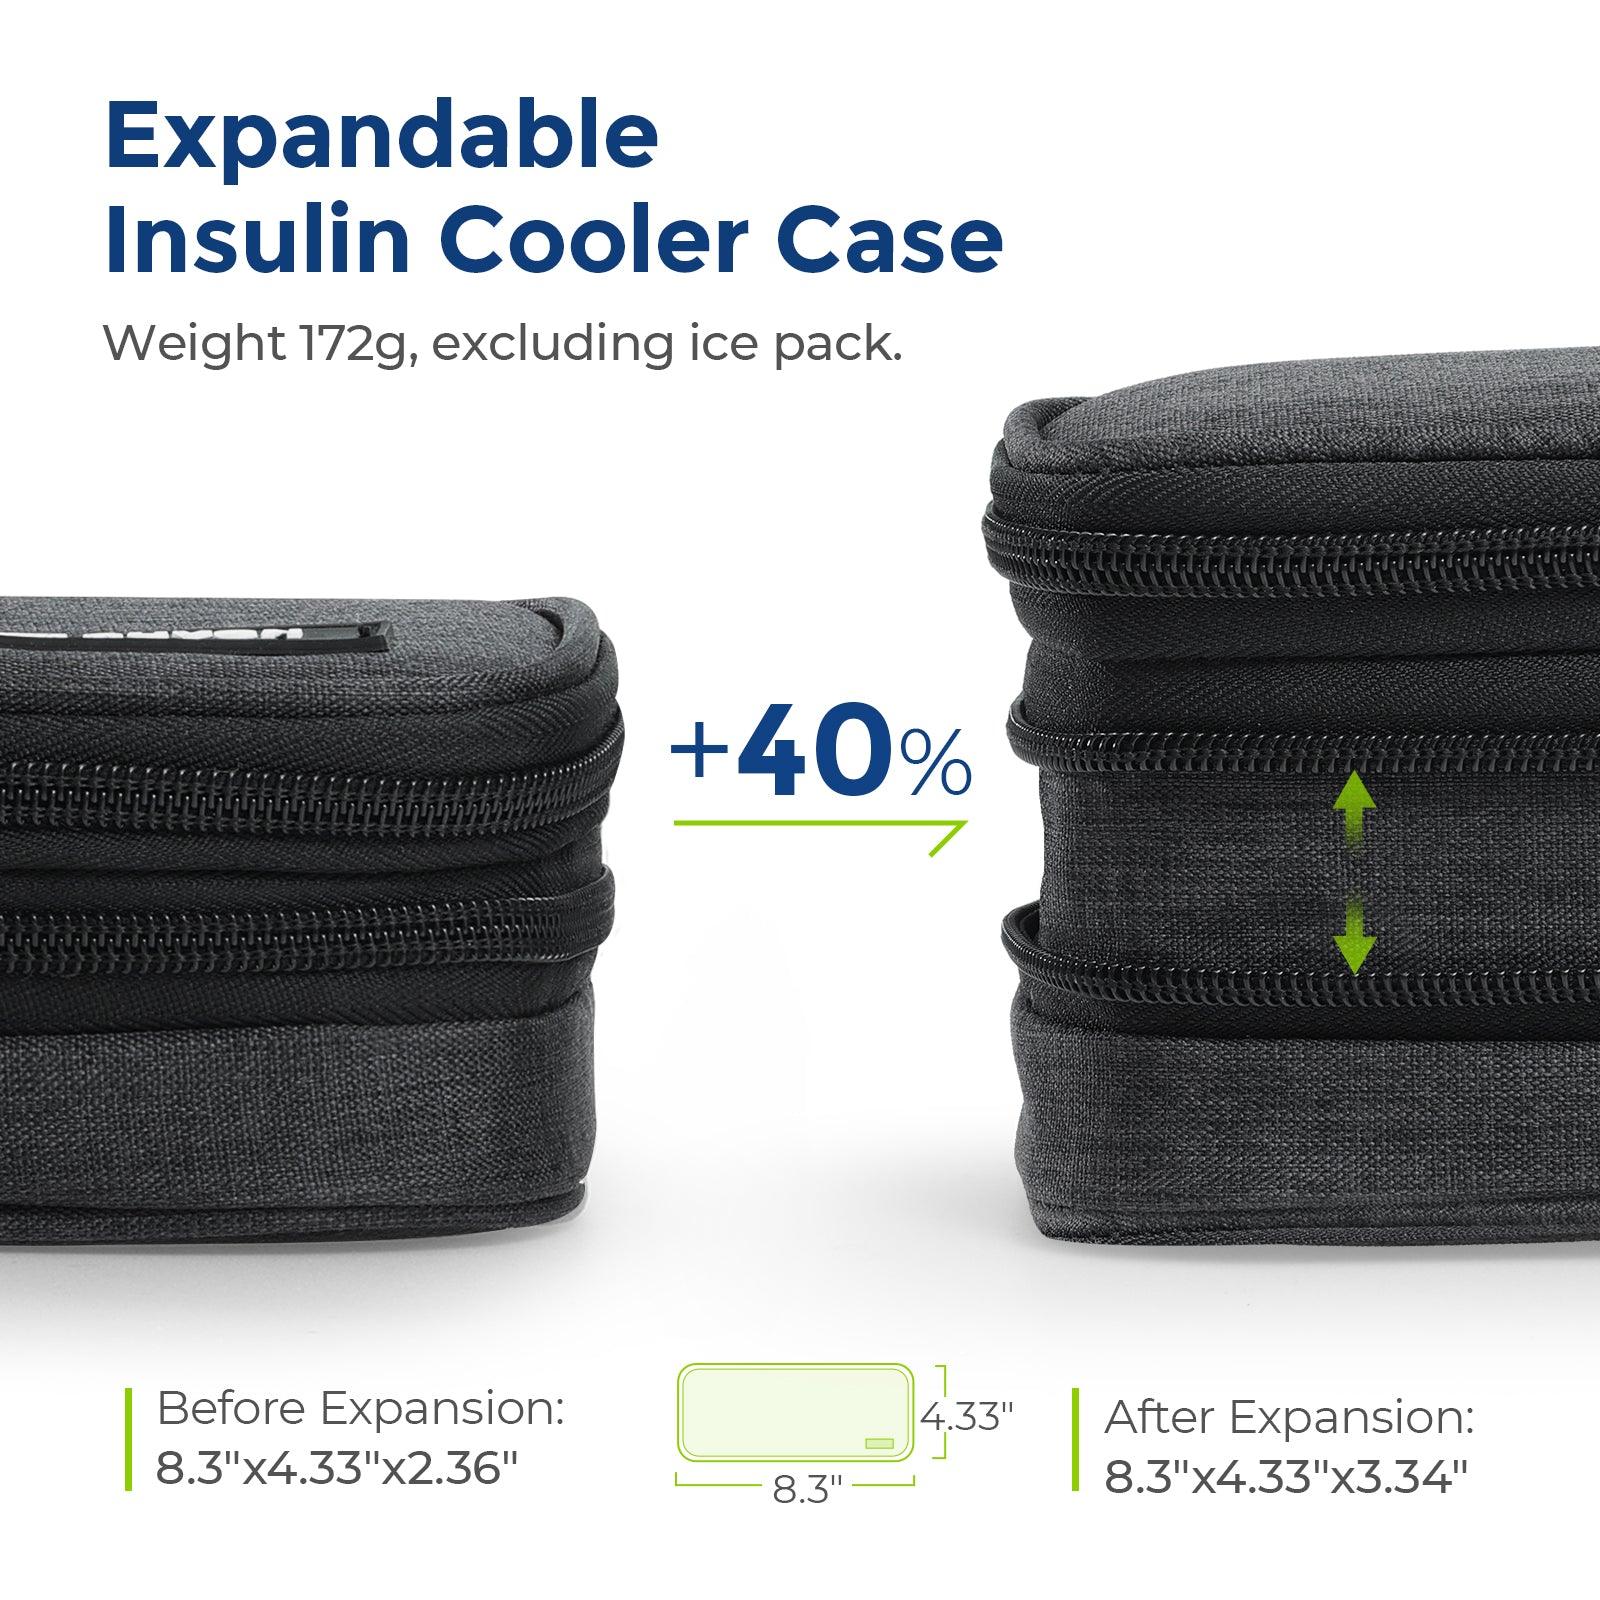 AUVON Insulin Cooler Travel Case, Expandable Insulated Diabetic Bag with 2 * 180g Ice Packs for Double Cooling Time, Portable Medication Cooler Bag for Insulin Pens and Blood Glucose Monitor Supplies - AUVON